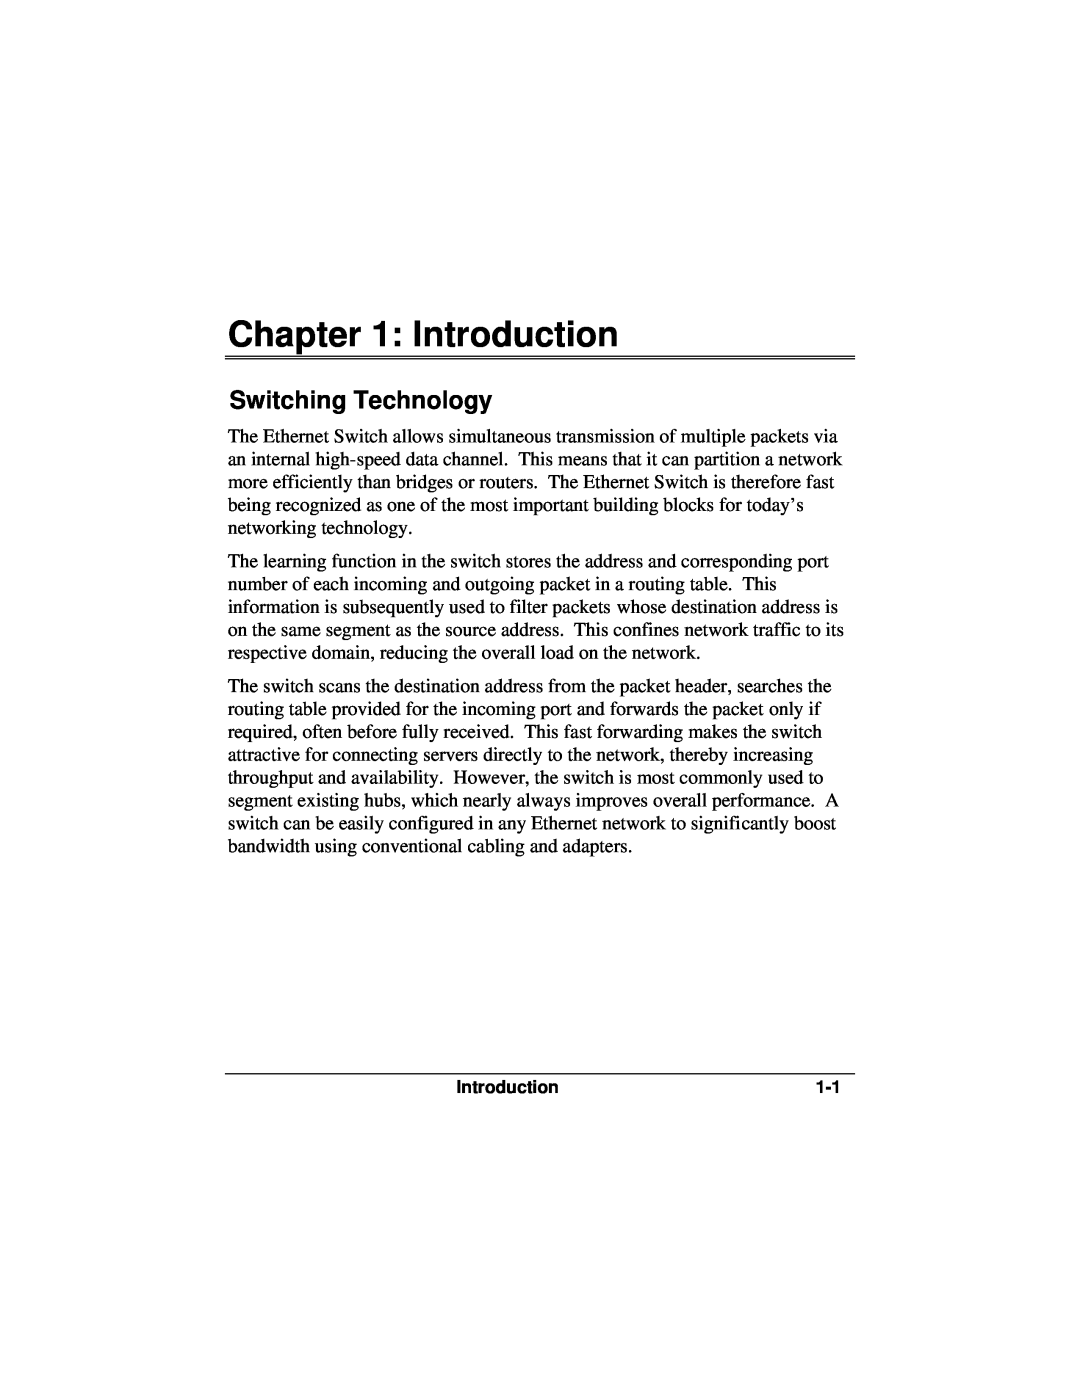 Accton Technology ES3002-TF manual Introduction, Switching Technology 